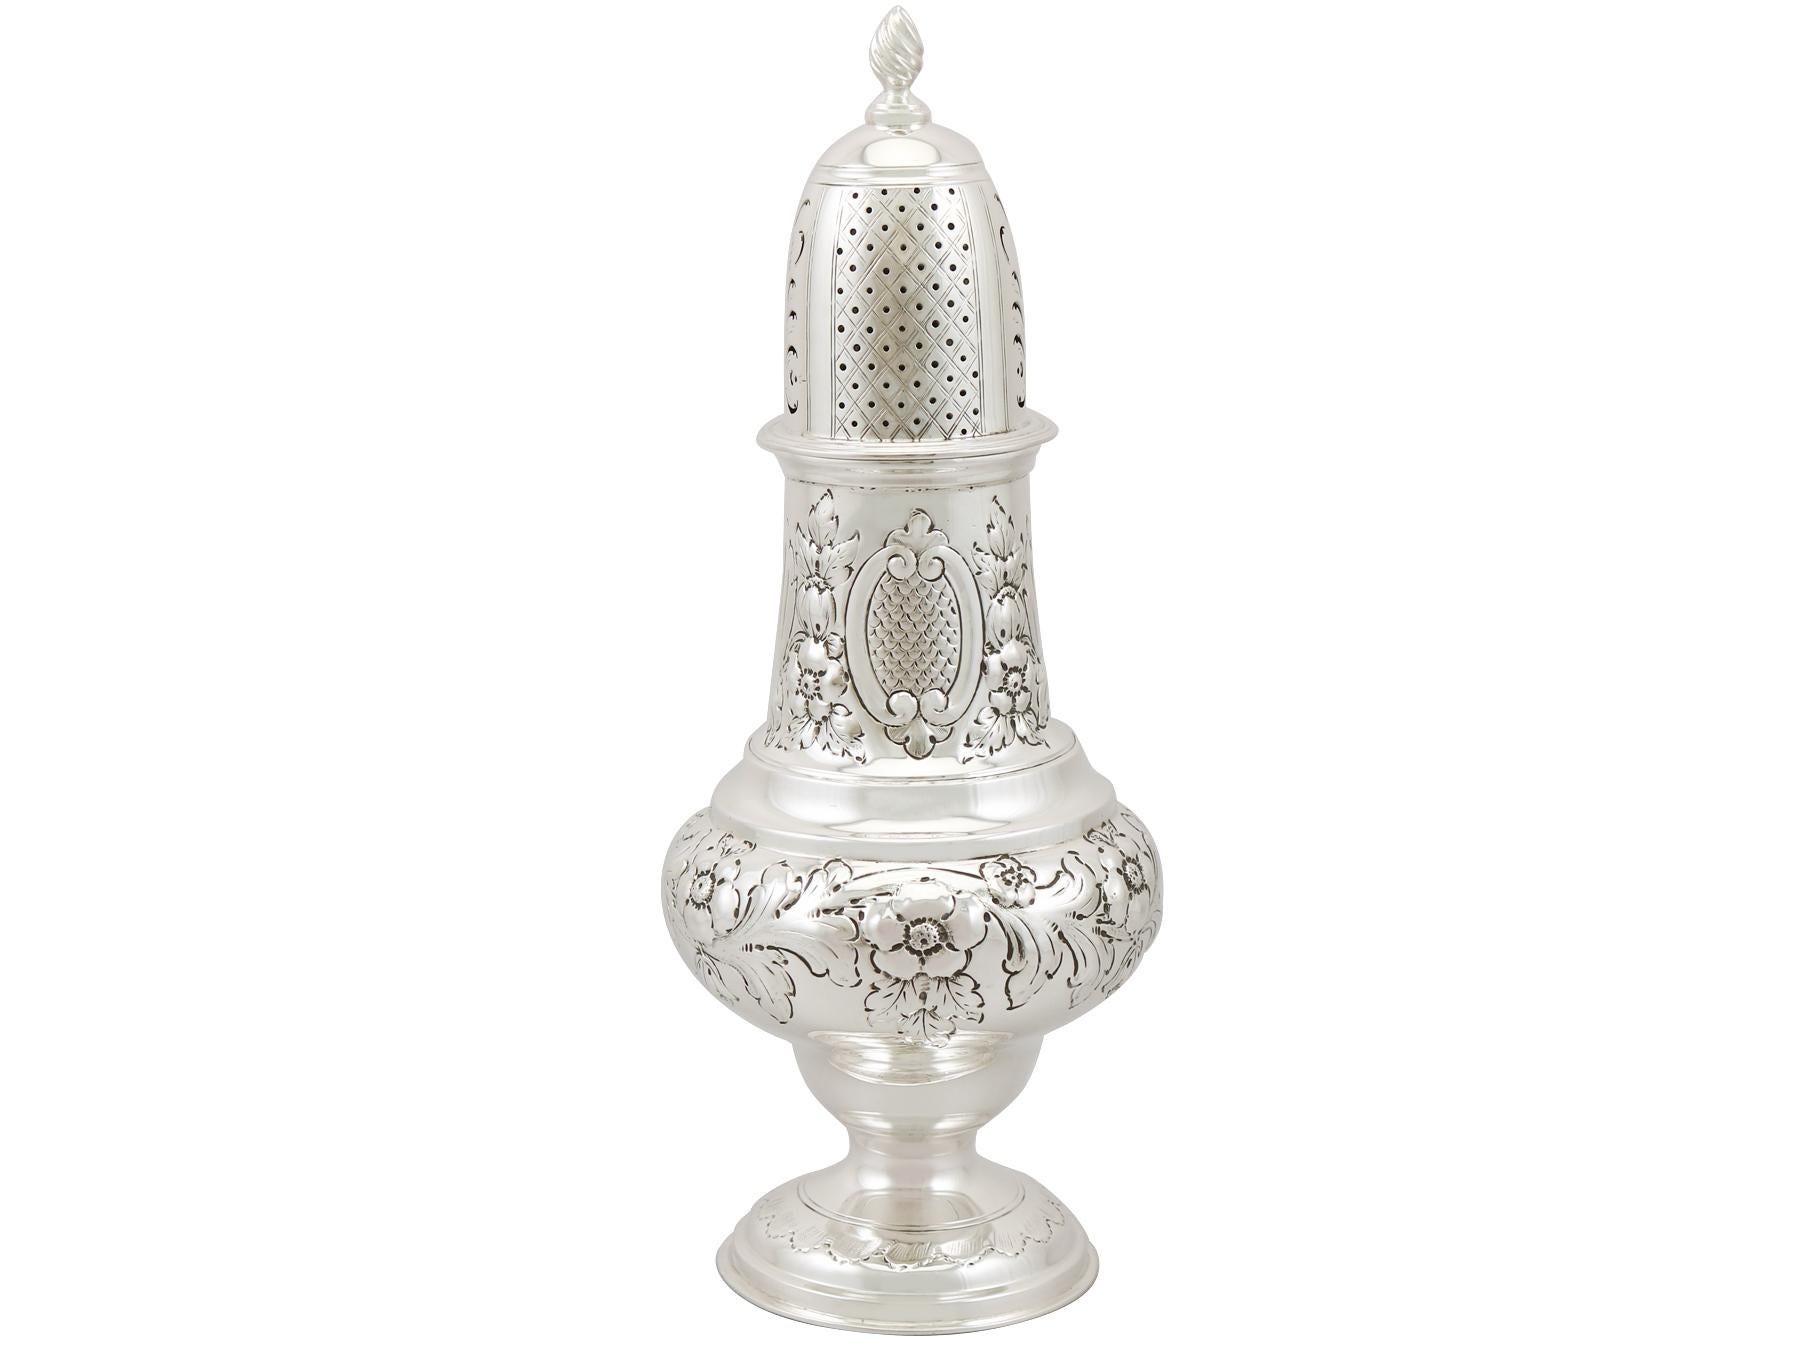 A fine and impressive, large antique Edwardian English sterling silver sugar caster; an addition to our silver teaware collection.

This fine antique Edwardian sterling silver sugar caster has a baluster shaped form onto a spreading domed foot.

The